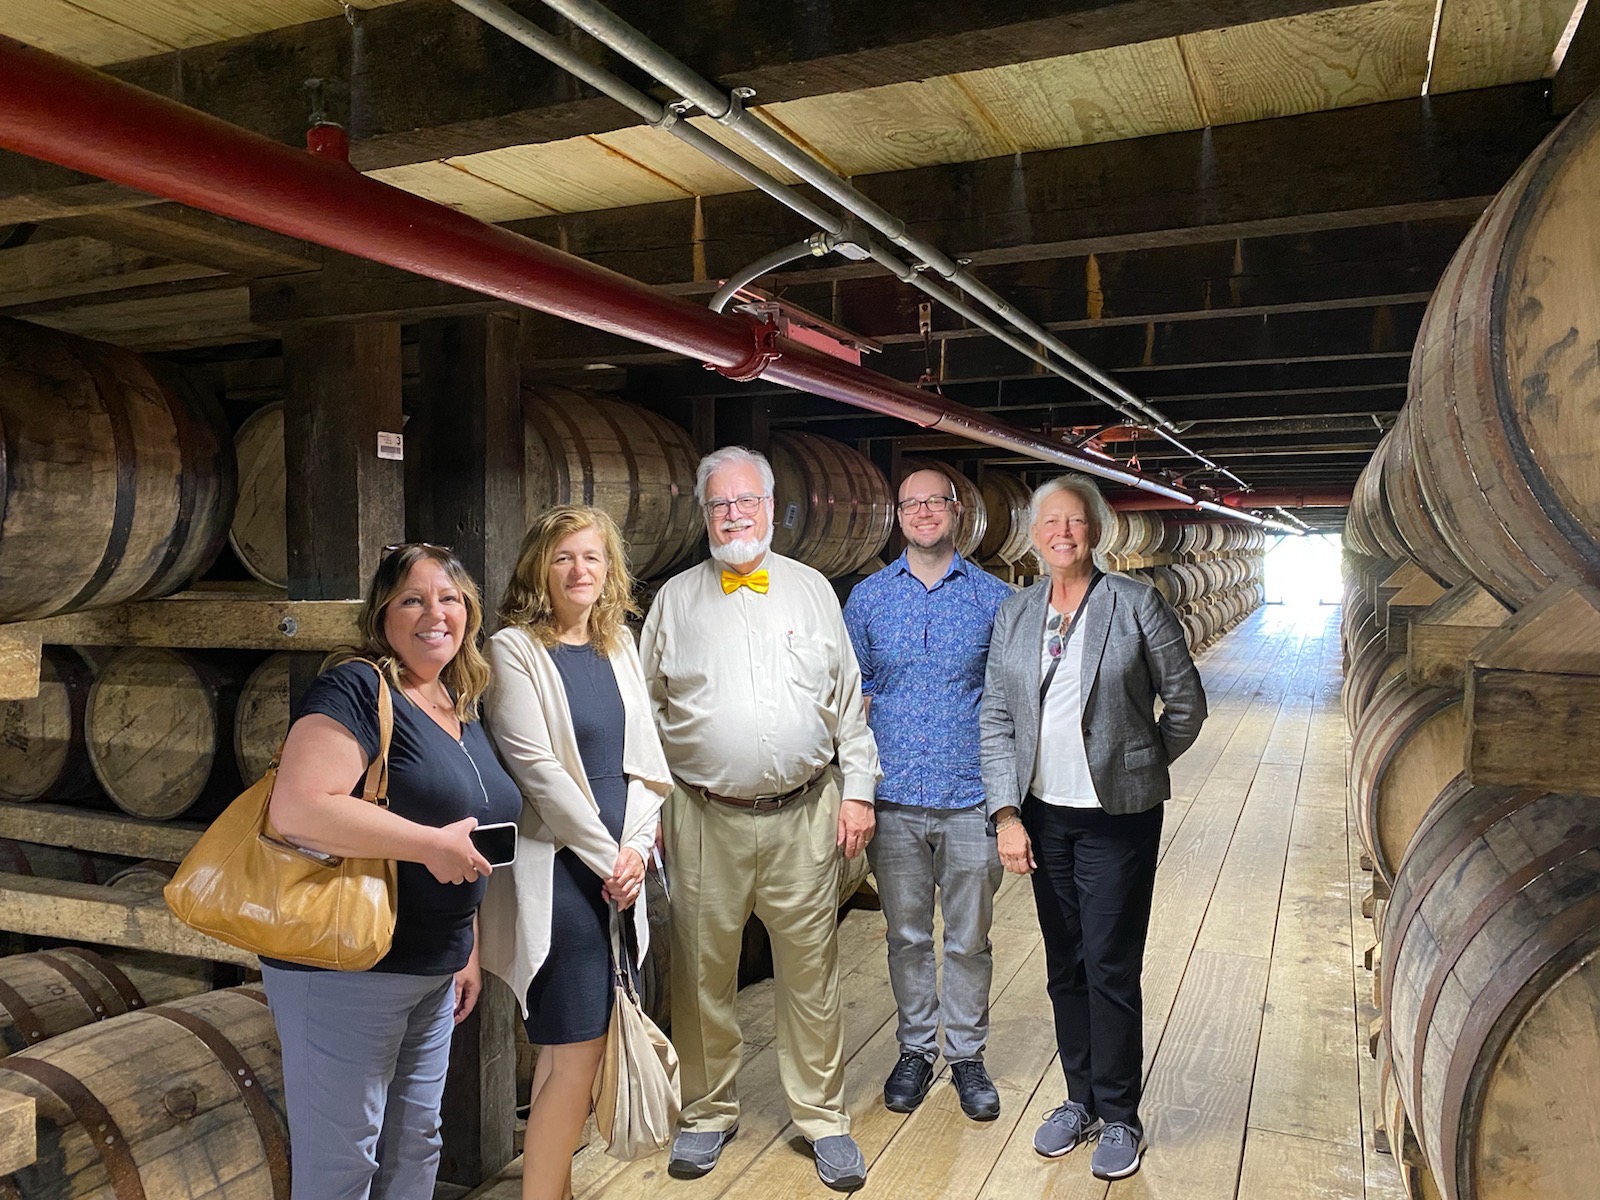 Manuela Perri, Julijana Curcic, Bob Hausladen, Alex Bryant and Virginia Denny of the UofL College of Business executive education program in a barrel house at Jim Beam Distillery.